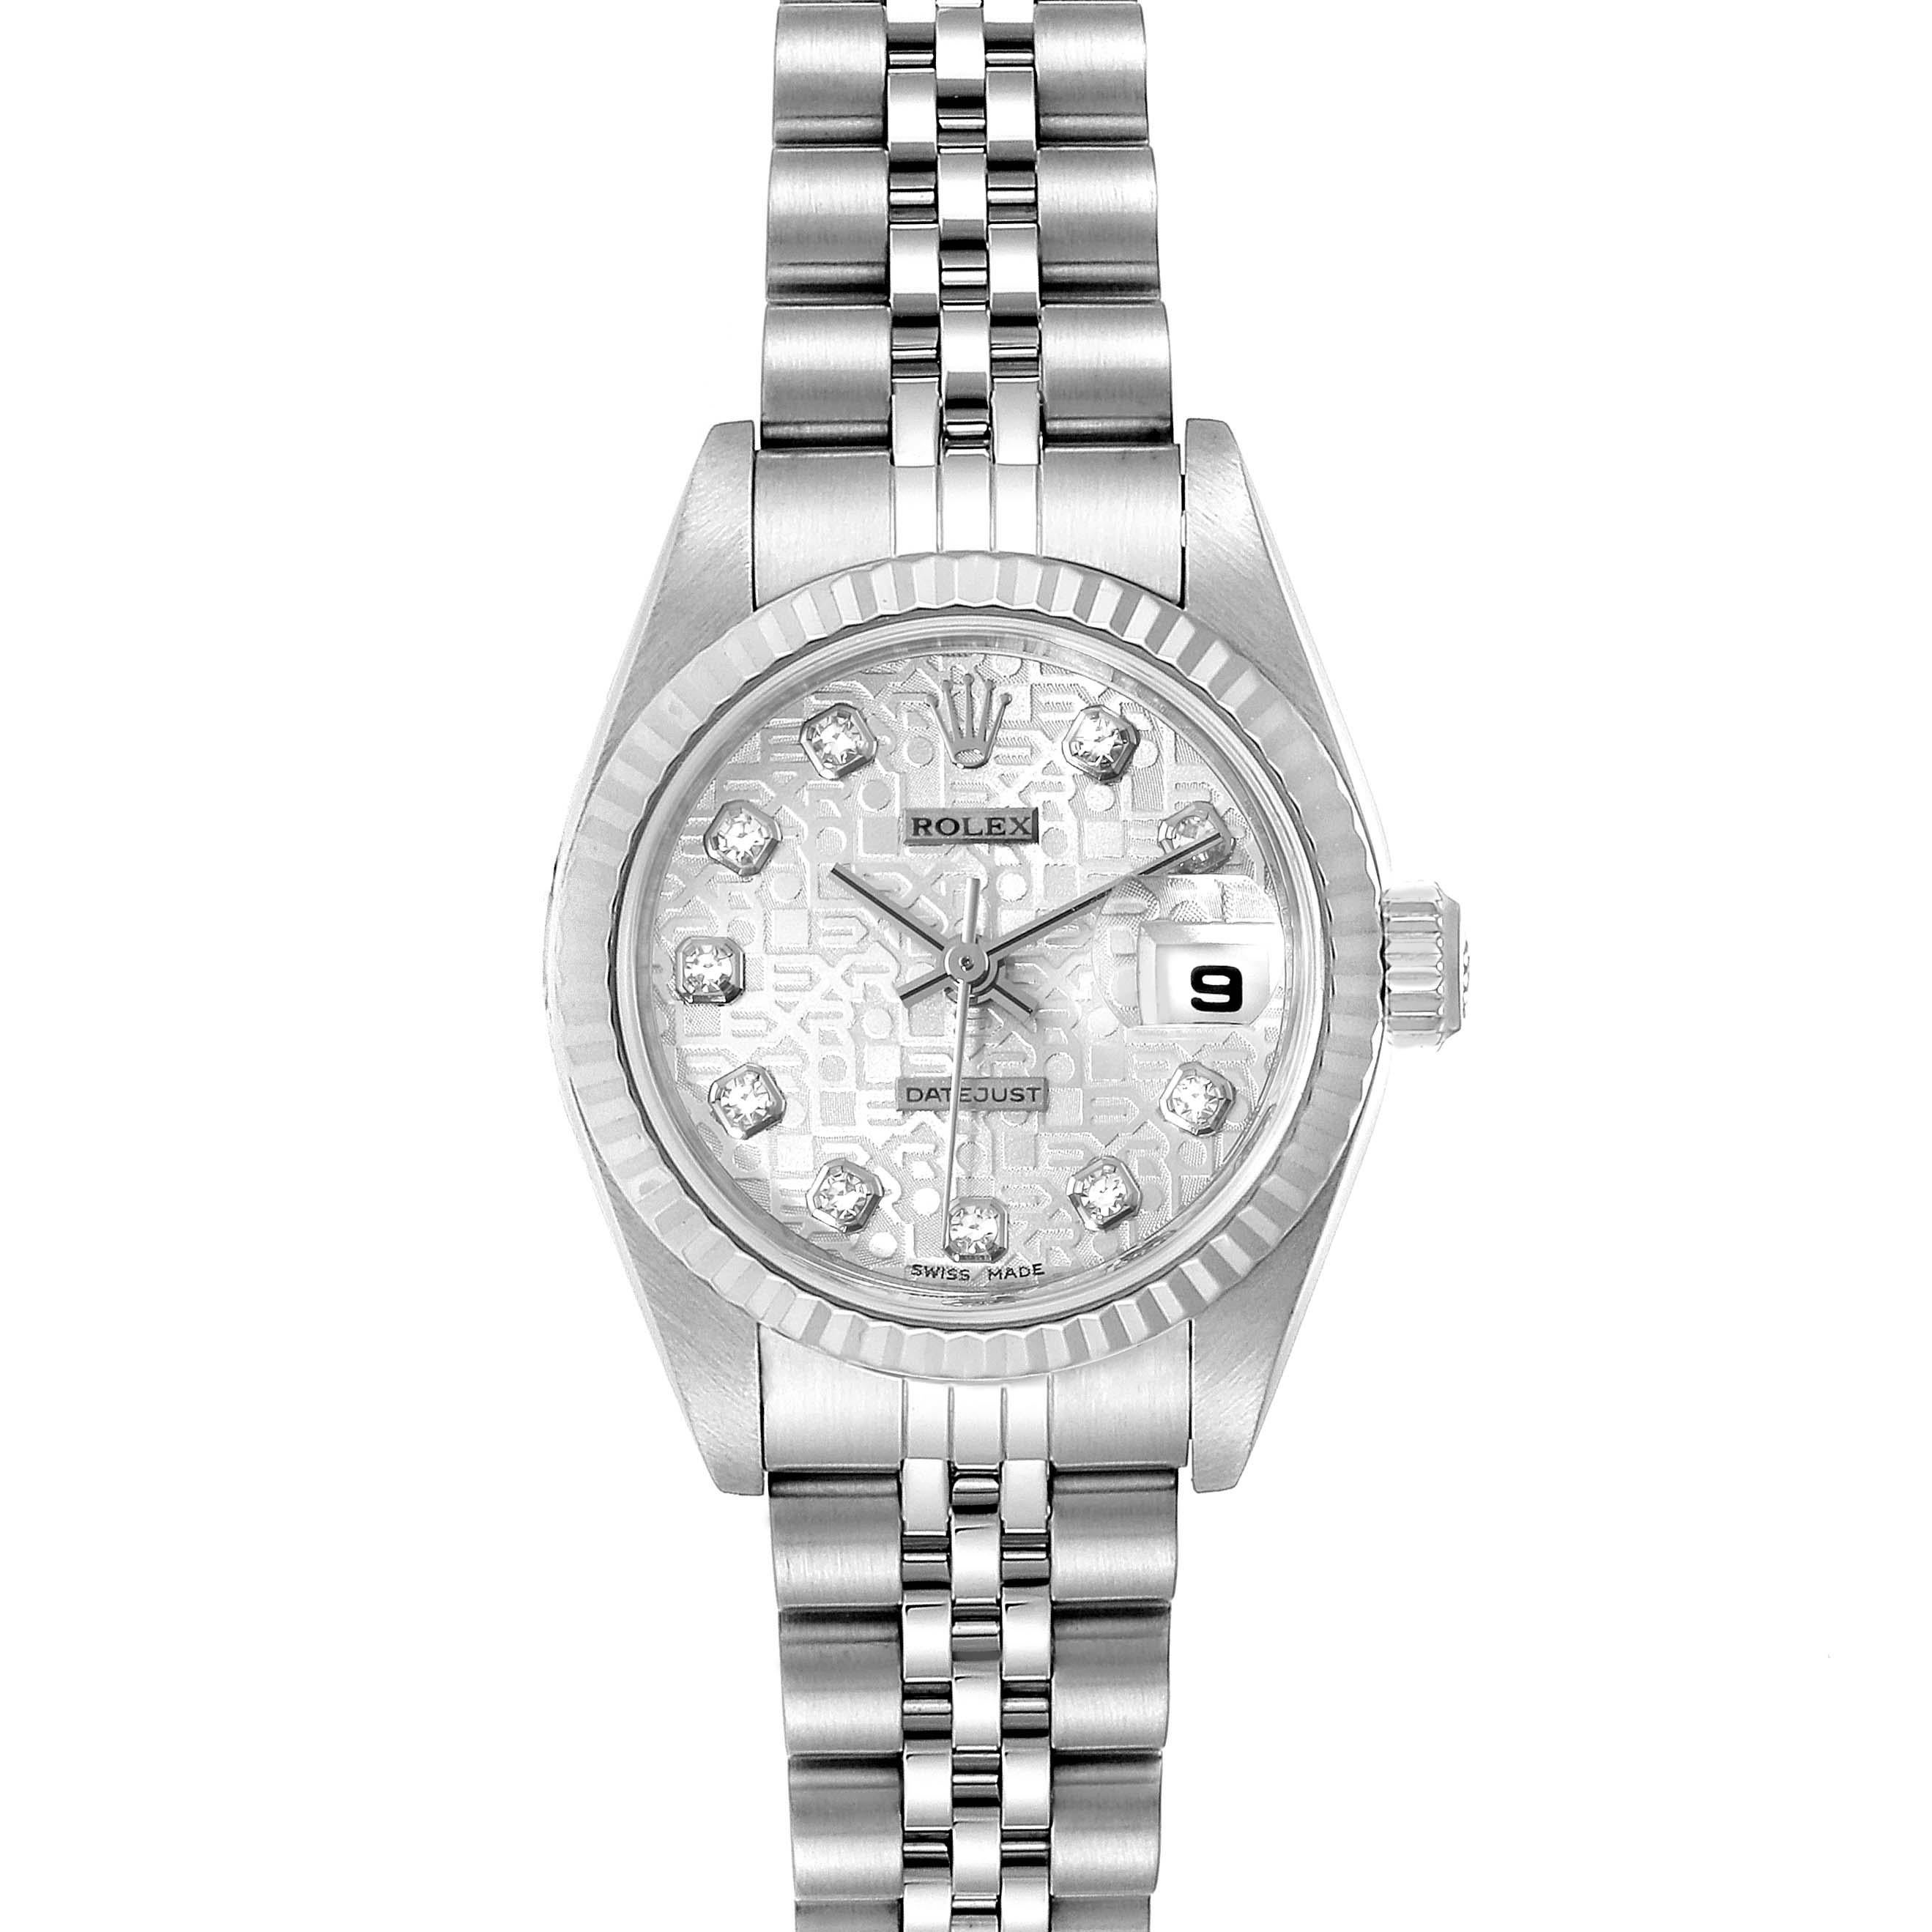 Rolex Datejust Steel White Gold Silver Diamond Dial Ladies Watch 79174. Officially certified chronometer self-winding movement. Stainless steel oyster case 26.0 mm in diameter. Rolex logo on a crown. 18k white gold fluted bezel. Scratch resistant